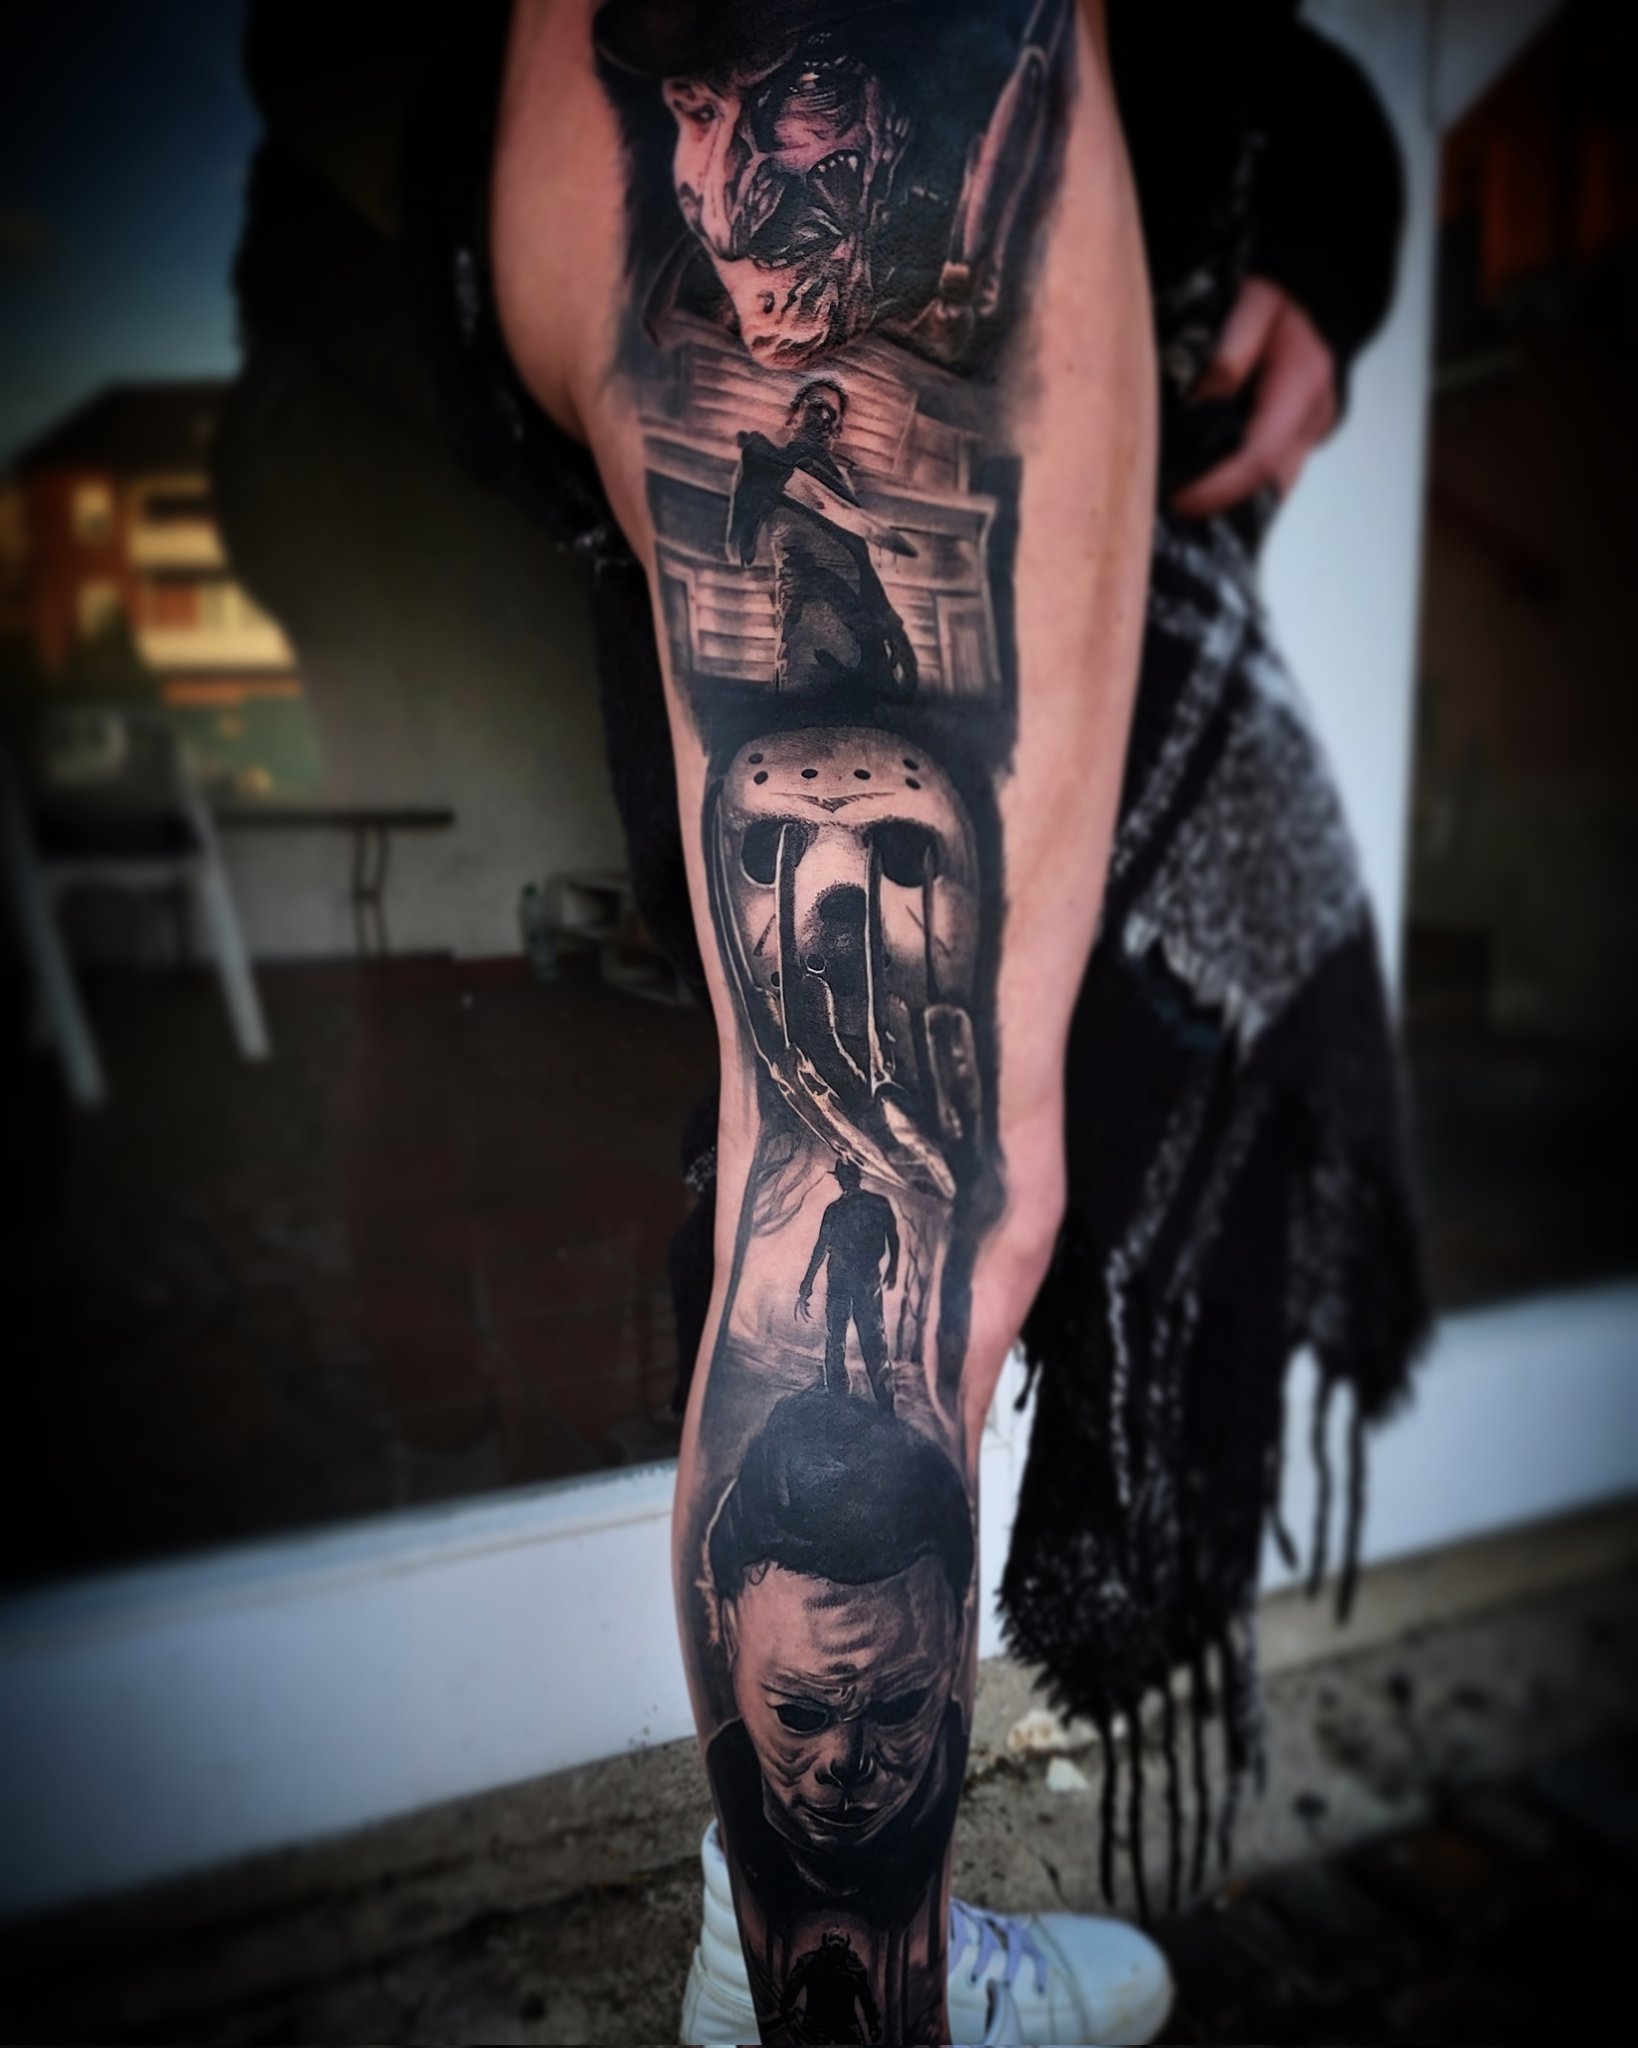 Tattoo uploaded by Cody whitcomb  Michael Myers tattoo idea tattoos  tattoo horrortattoo horror  Tattoodo